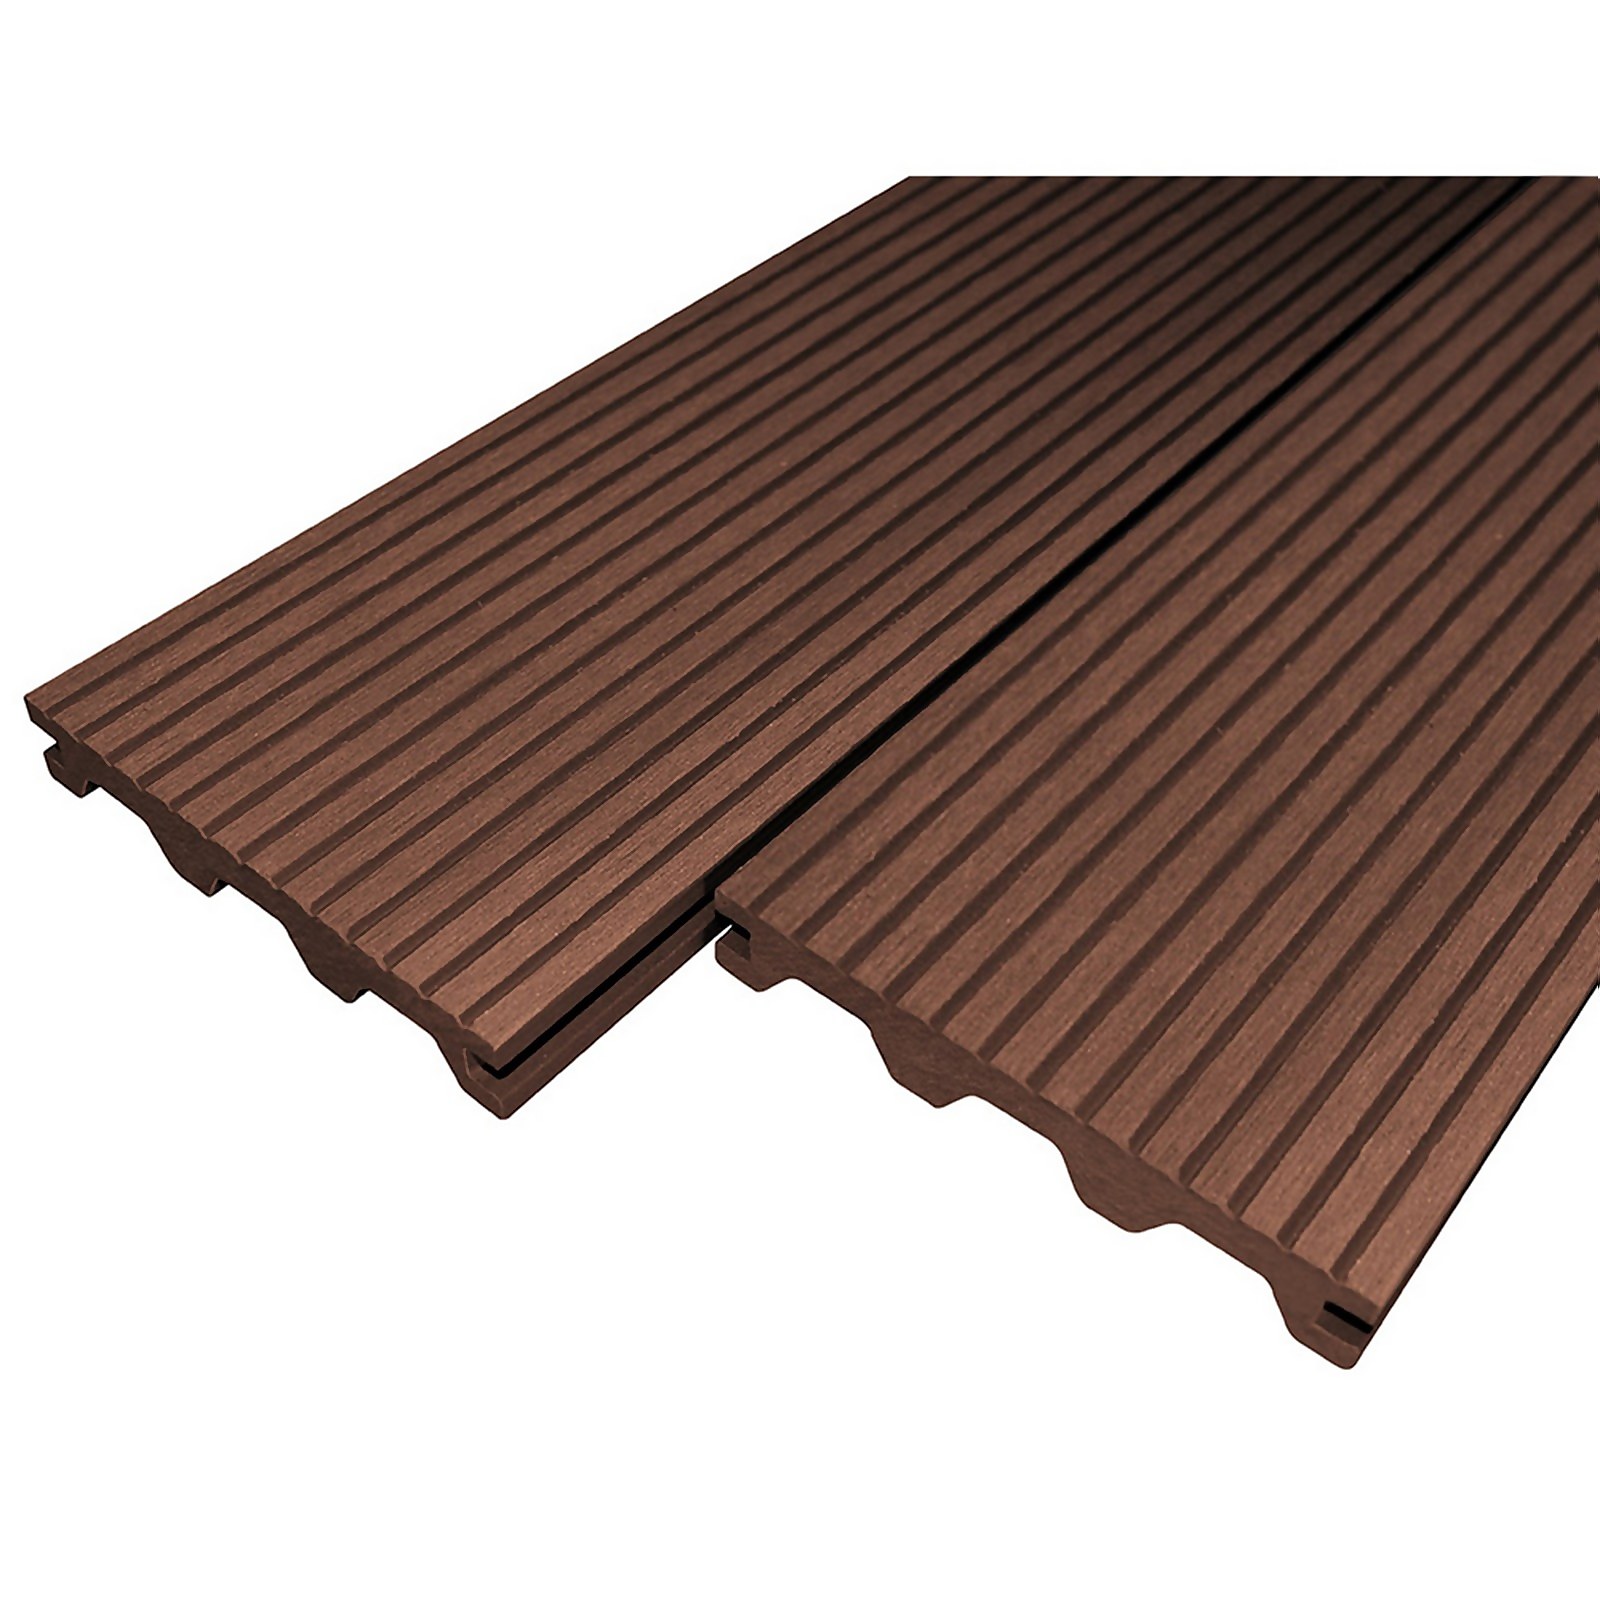 Photo of Victoria Composite Decking Castle Groove 30 Pack Redwood - 15.12 M2